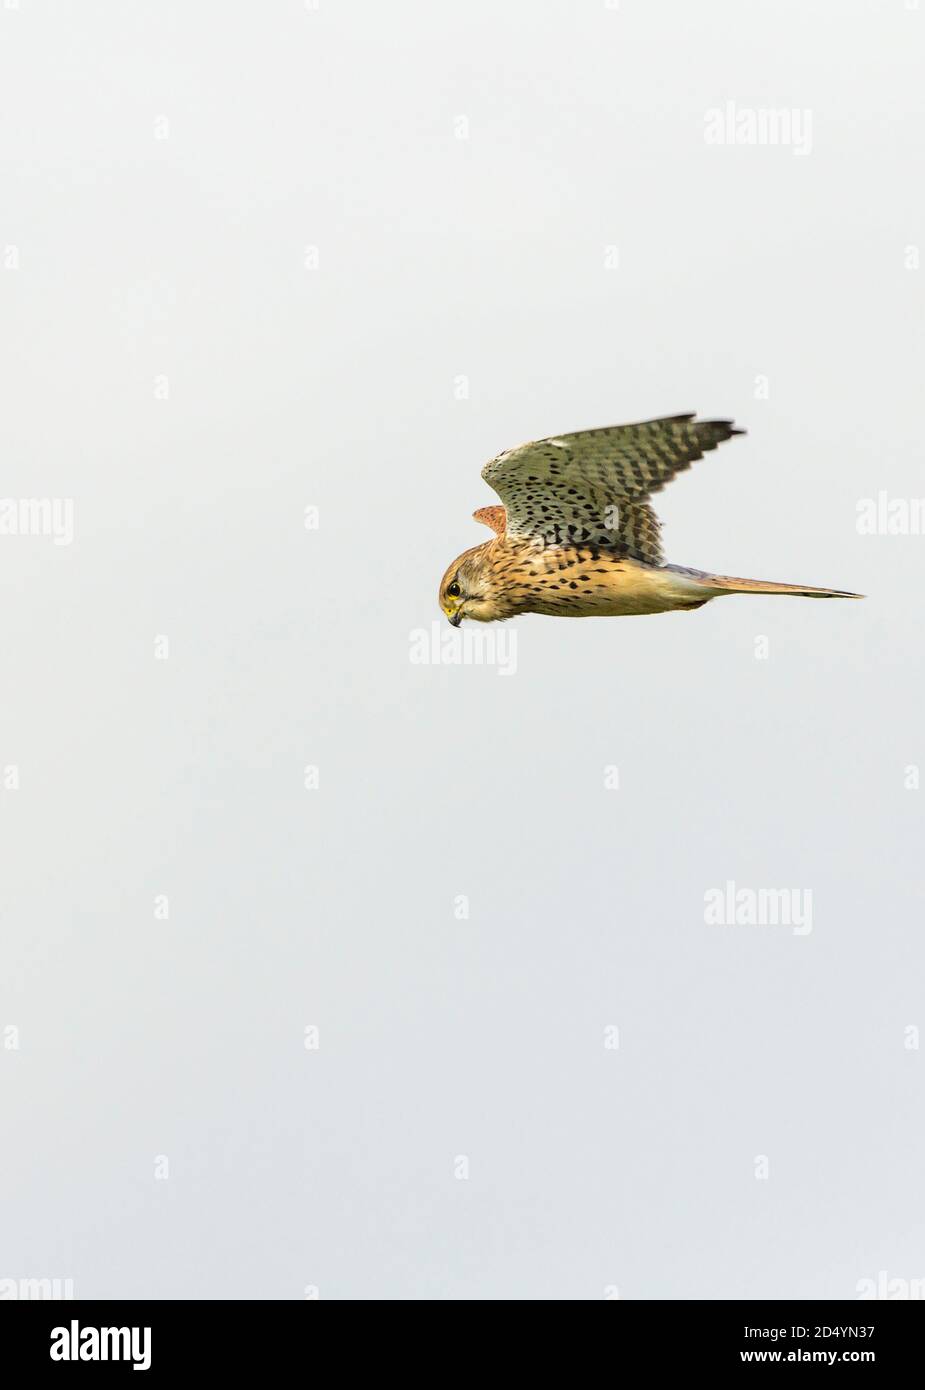 Kestrel (Falco tinnunculus), falcon female bird in flight hovering. Has barred brown plumage yellow ring around eye and yellow base to hooked bill. Stock Photo